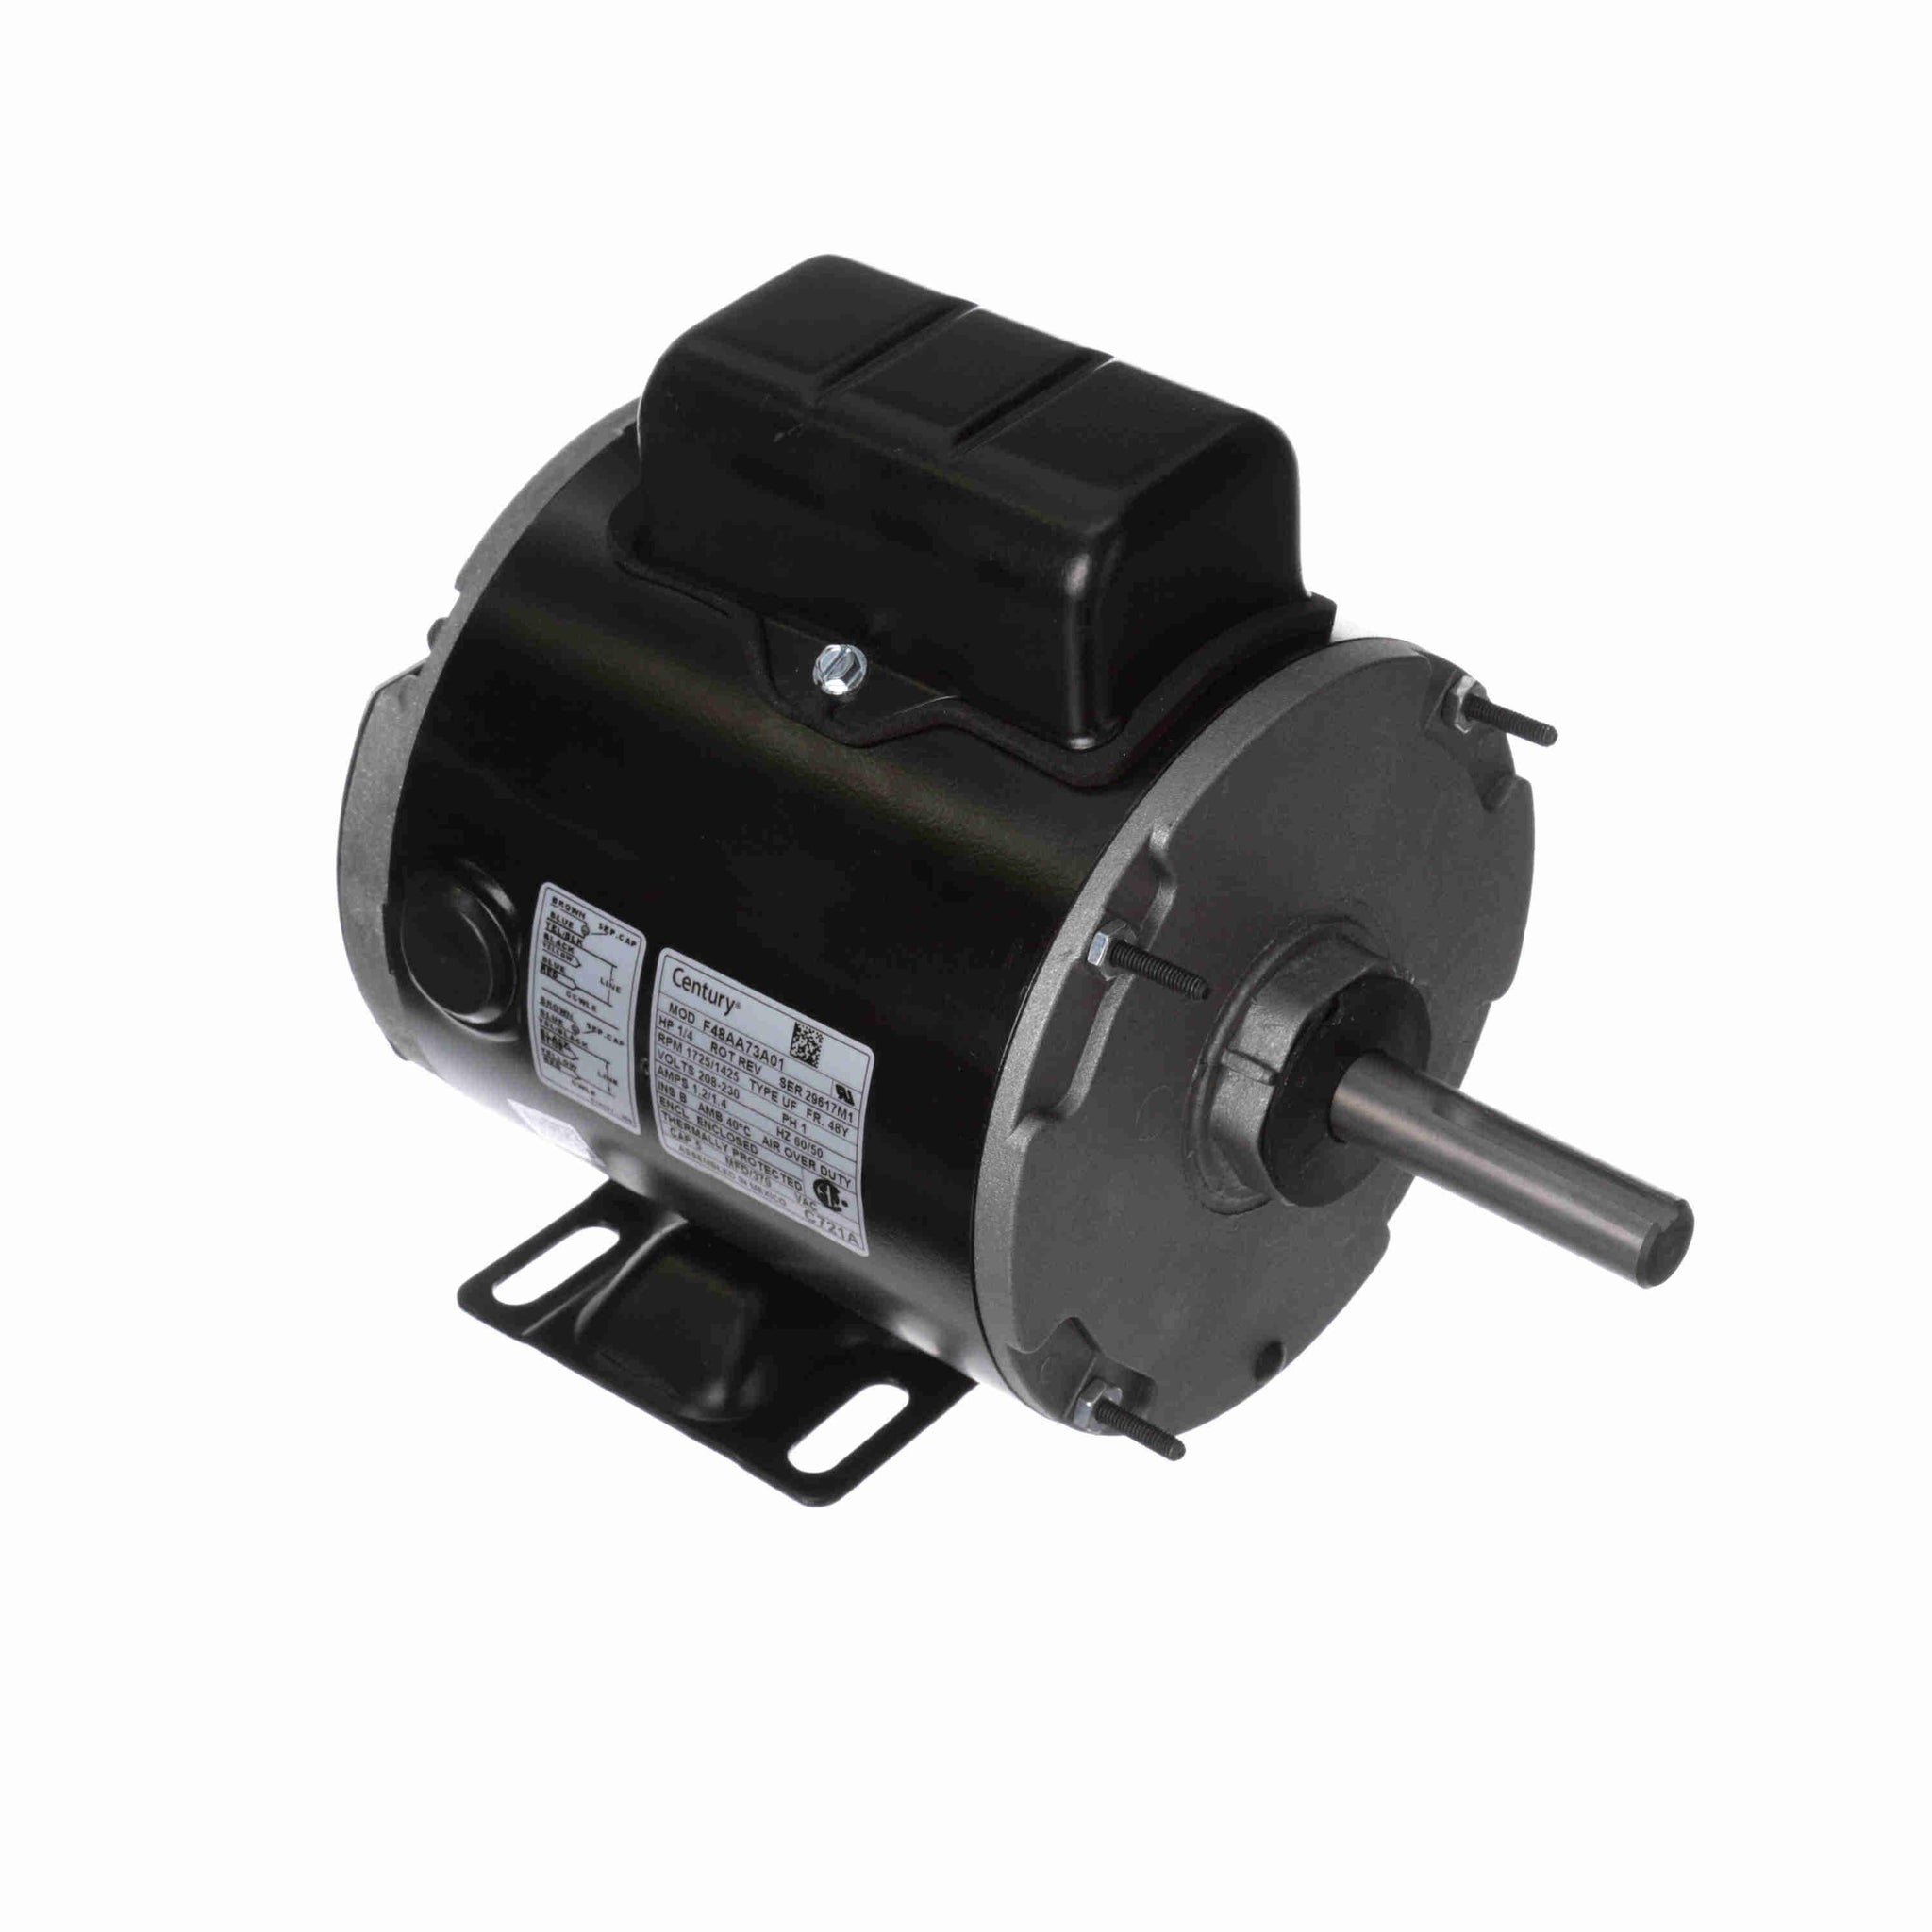 C721A -  1/4 HP Transformer Cooling Fan Motor, 1725/1425 RPM, 2 Speed, 208-230 Volts, 48 Frame, TEAO - Hardware & Moreee